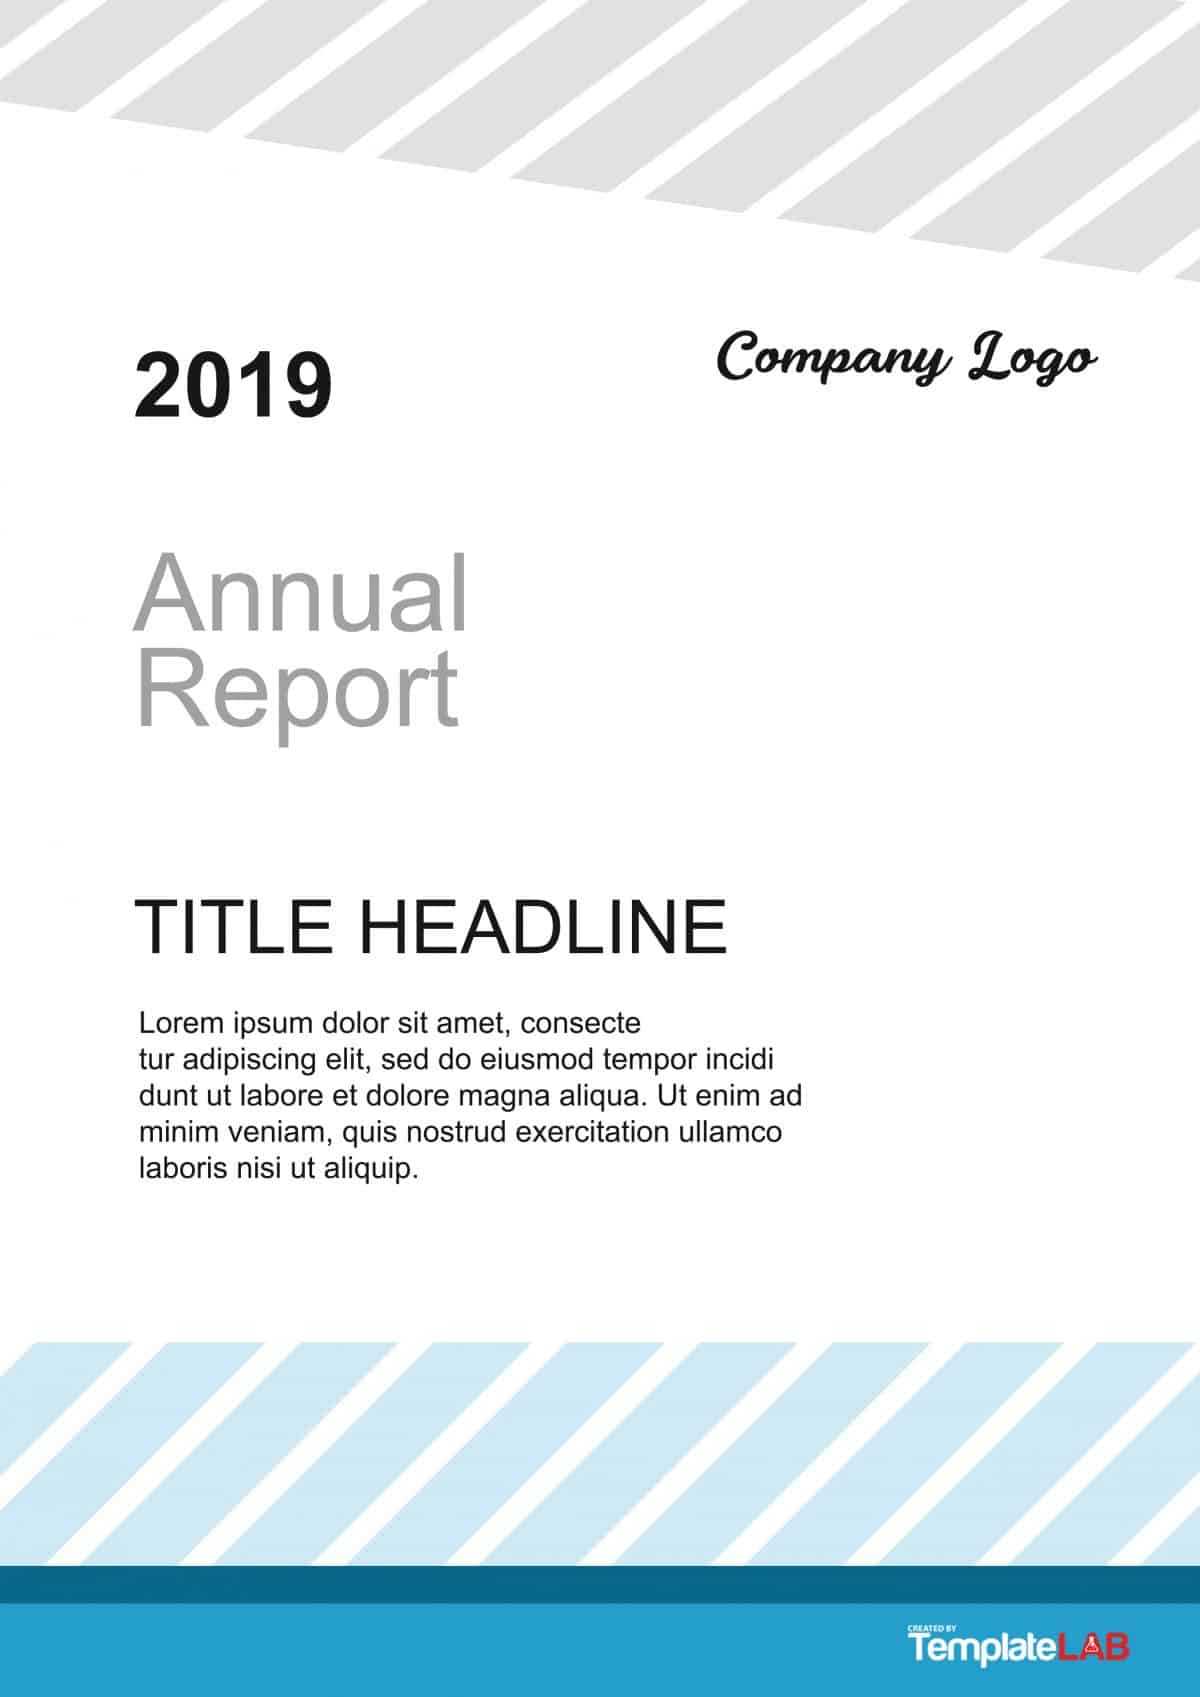 Technical Report Cover Page Template - Business Template Ideas Throughout Technical Report Cover Page Template